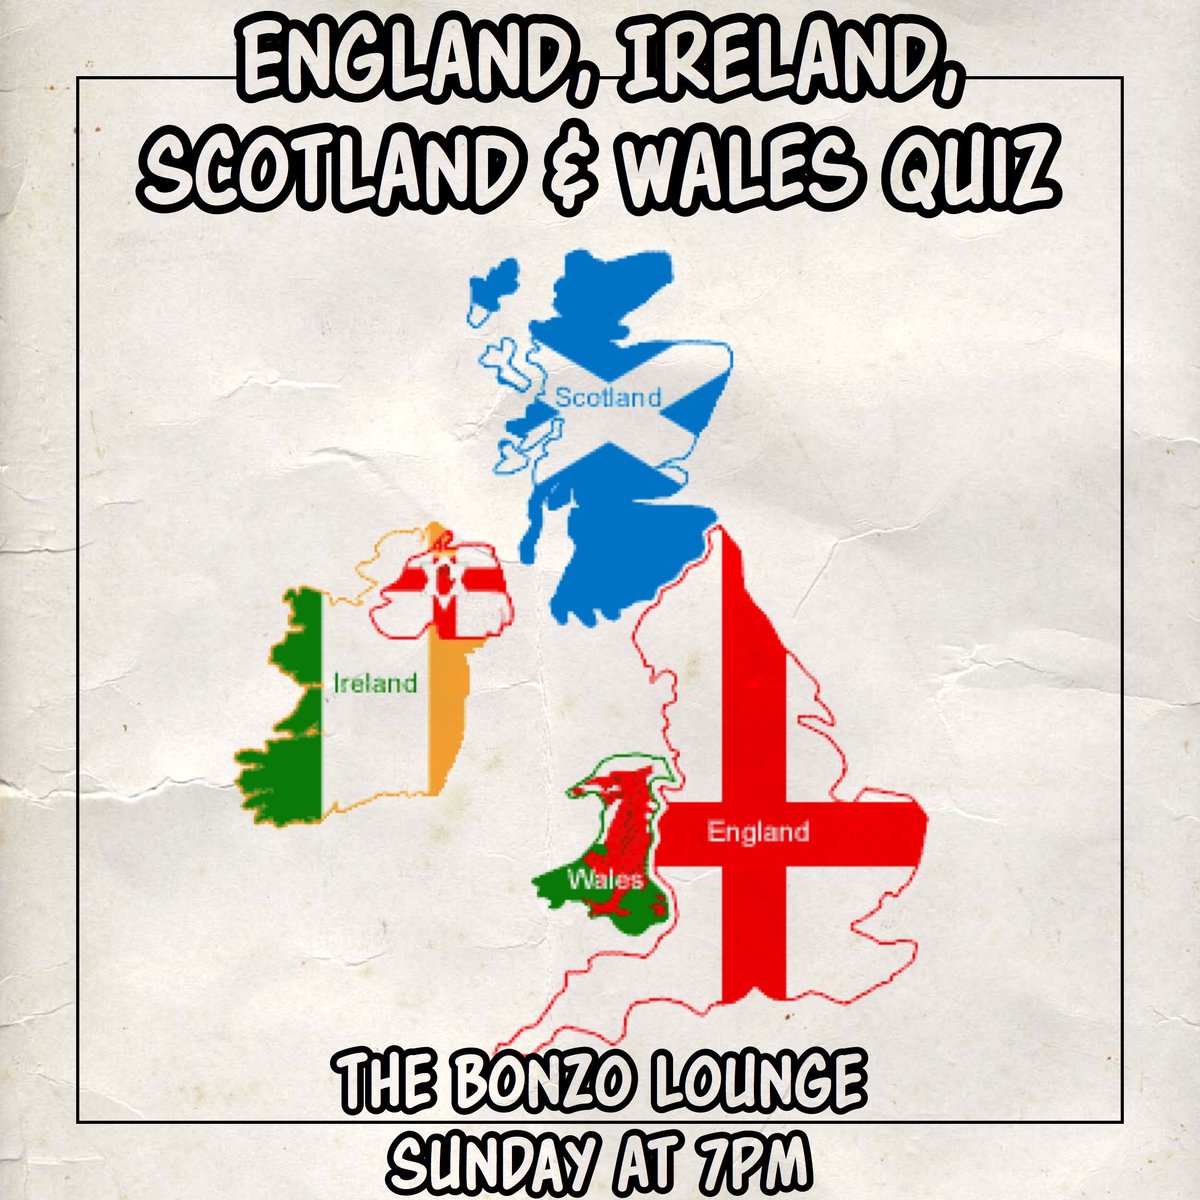 Join us on Sunday at #TheBonzoLounge in #Keynsham for our next #QuizNight! 7pm start for our #HomeNations #Quiz with cash and vouchers to be won